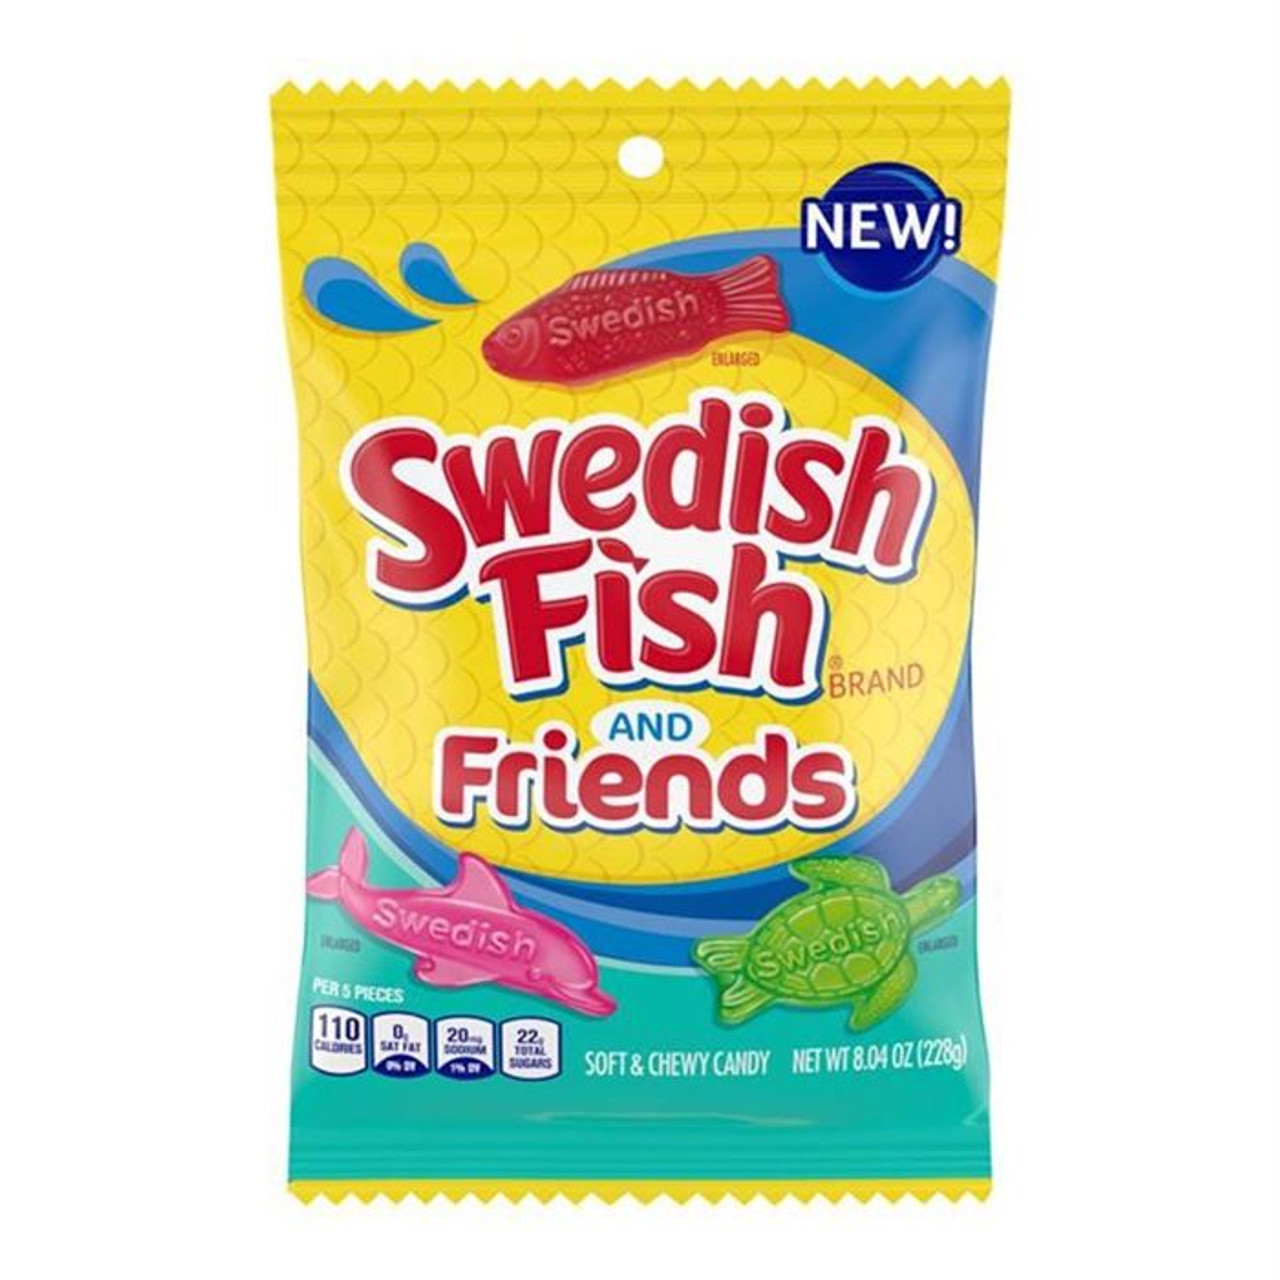 https://cdn11.bigcommerce.com/s-oxoxmgwste/images/stencil/1280x1280/products/3778/7474/swedish-fish-and-friends-8.04-oz__93360.1702579097.jpg?c=1